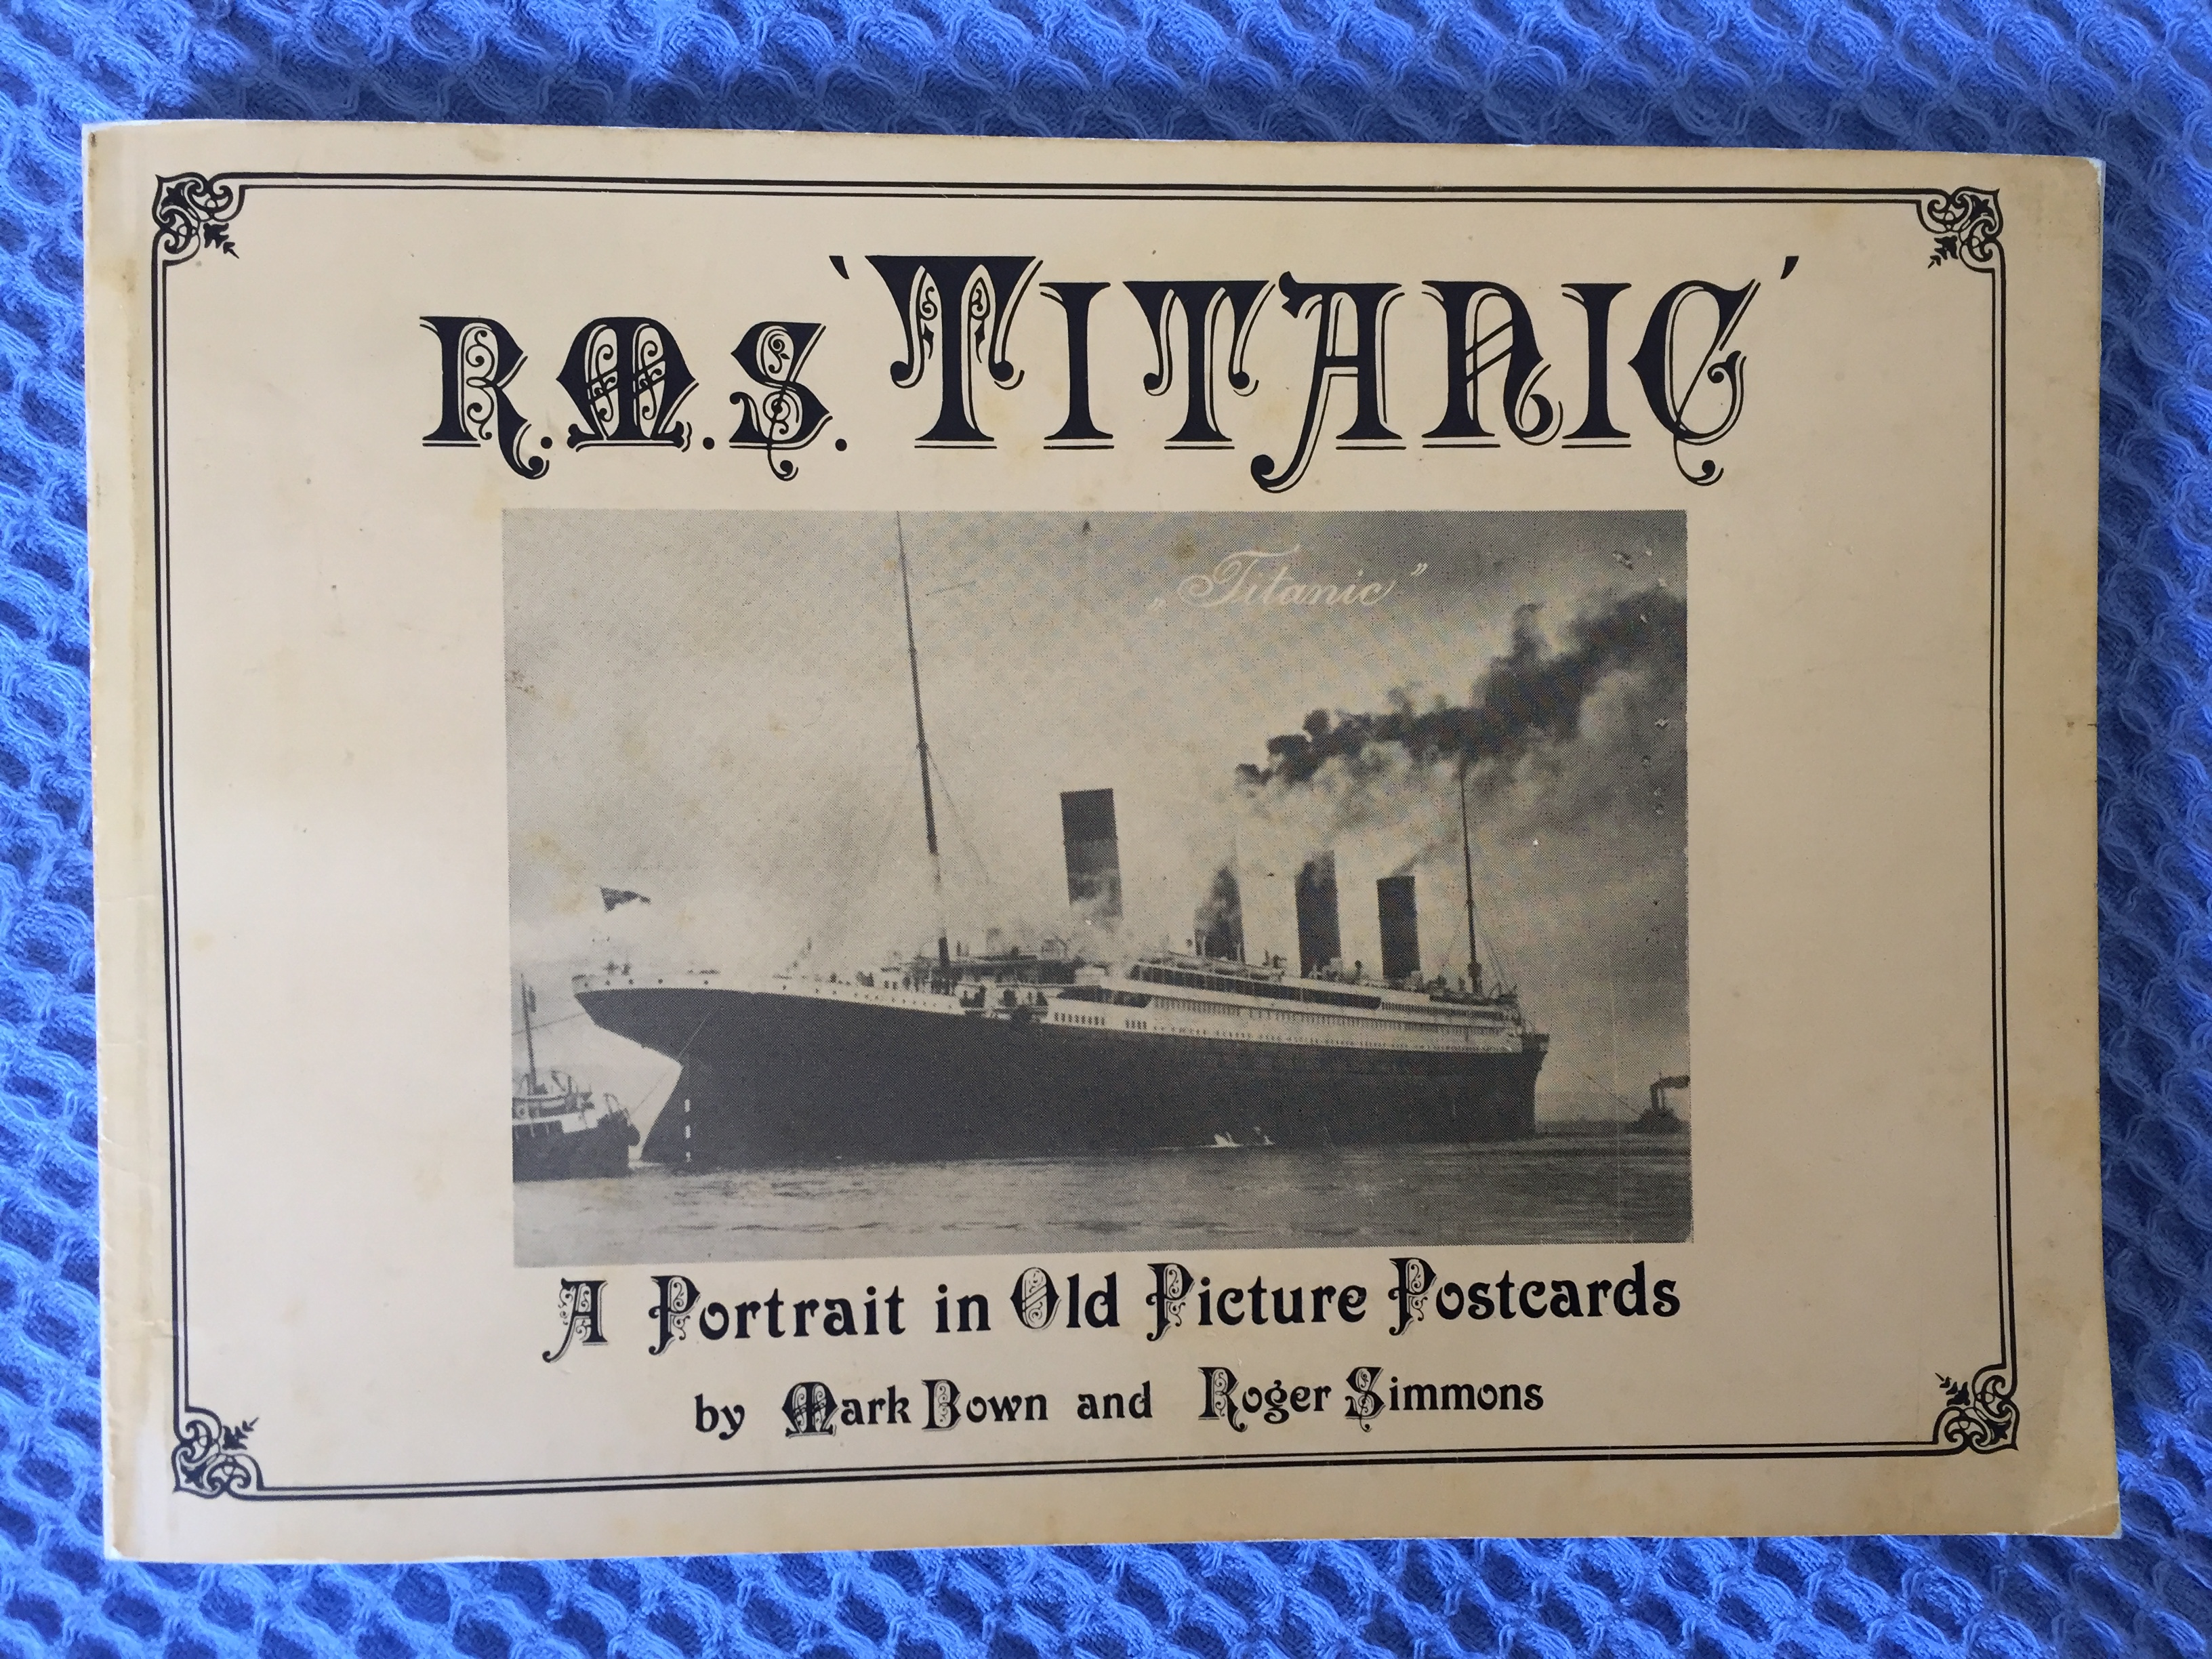 FANTASTIC BOOKLET OF MANY TYPES OF TITANIC POSTCARDS